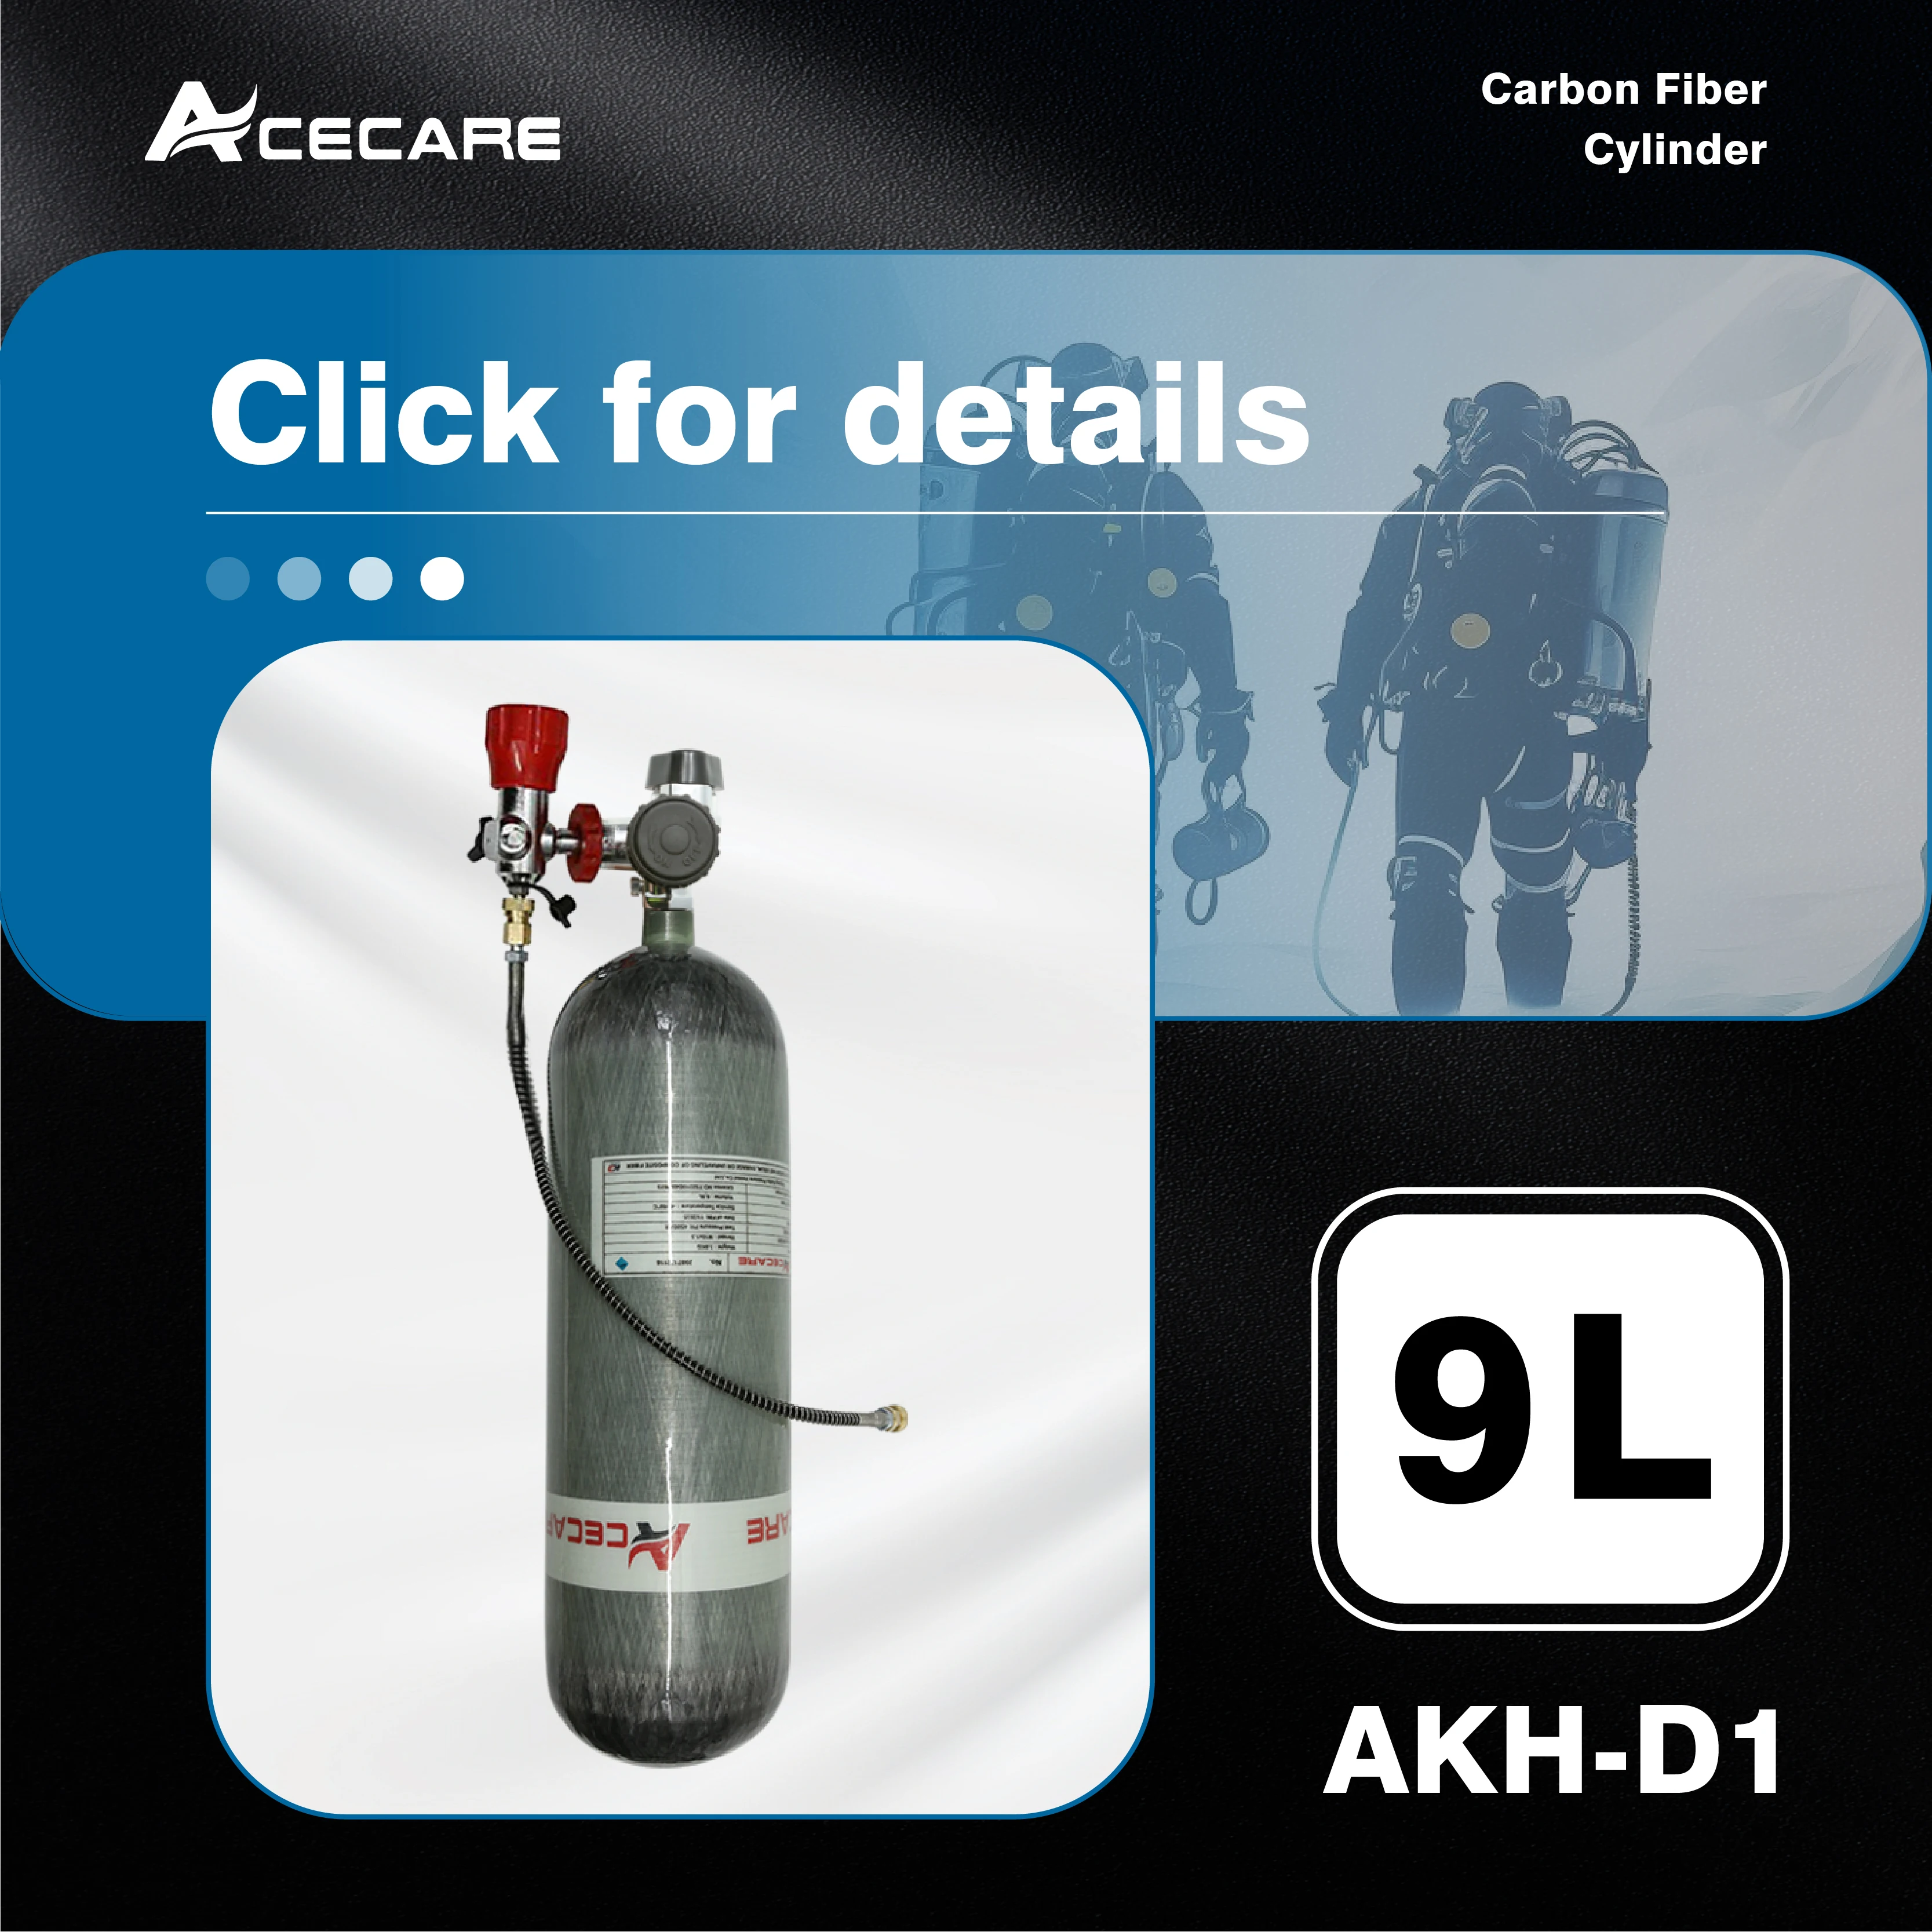 

AKH-D1 Acecare 9L 4500Psi 300Bar 30Mpa Carbon Fiber Gas Cylinder Air Bottle HPA Tank M18*1.5 with Valve and Filling Station